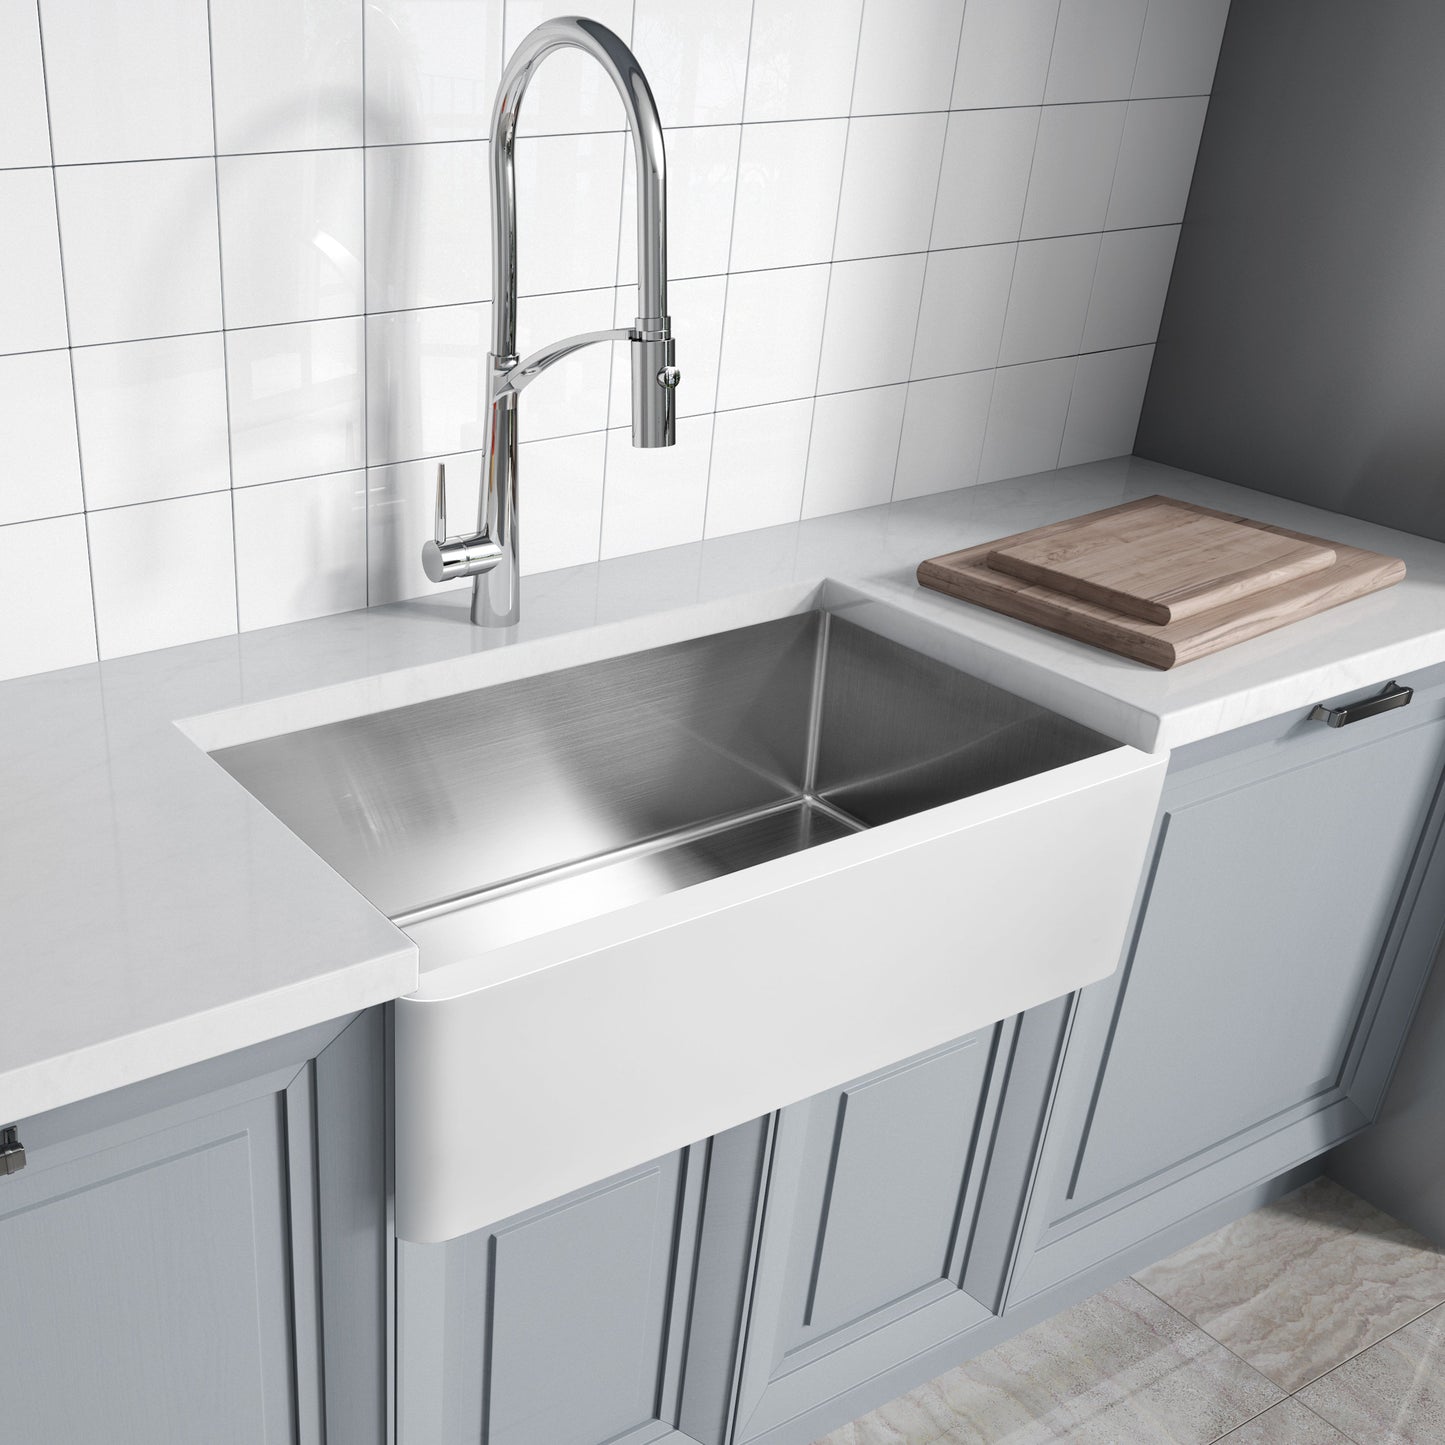 ANZZI Apollo Series 36" Single Basin Matte White Solid Surface Farmhouse Kitchen Sink With Chrome Strainer and Drain Assembly